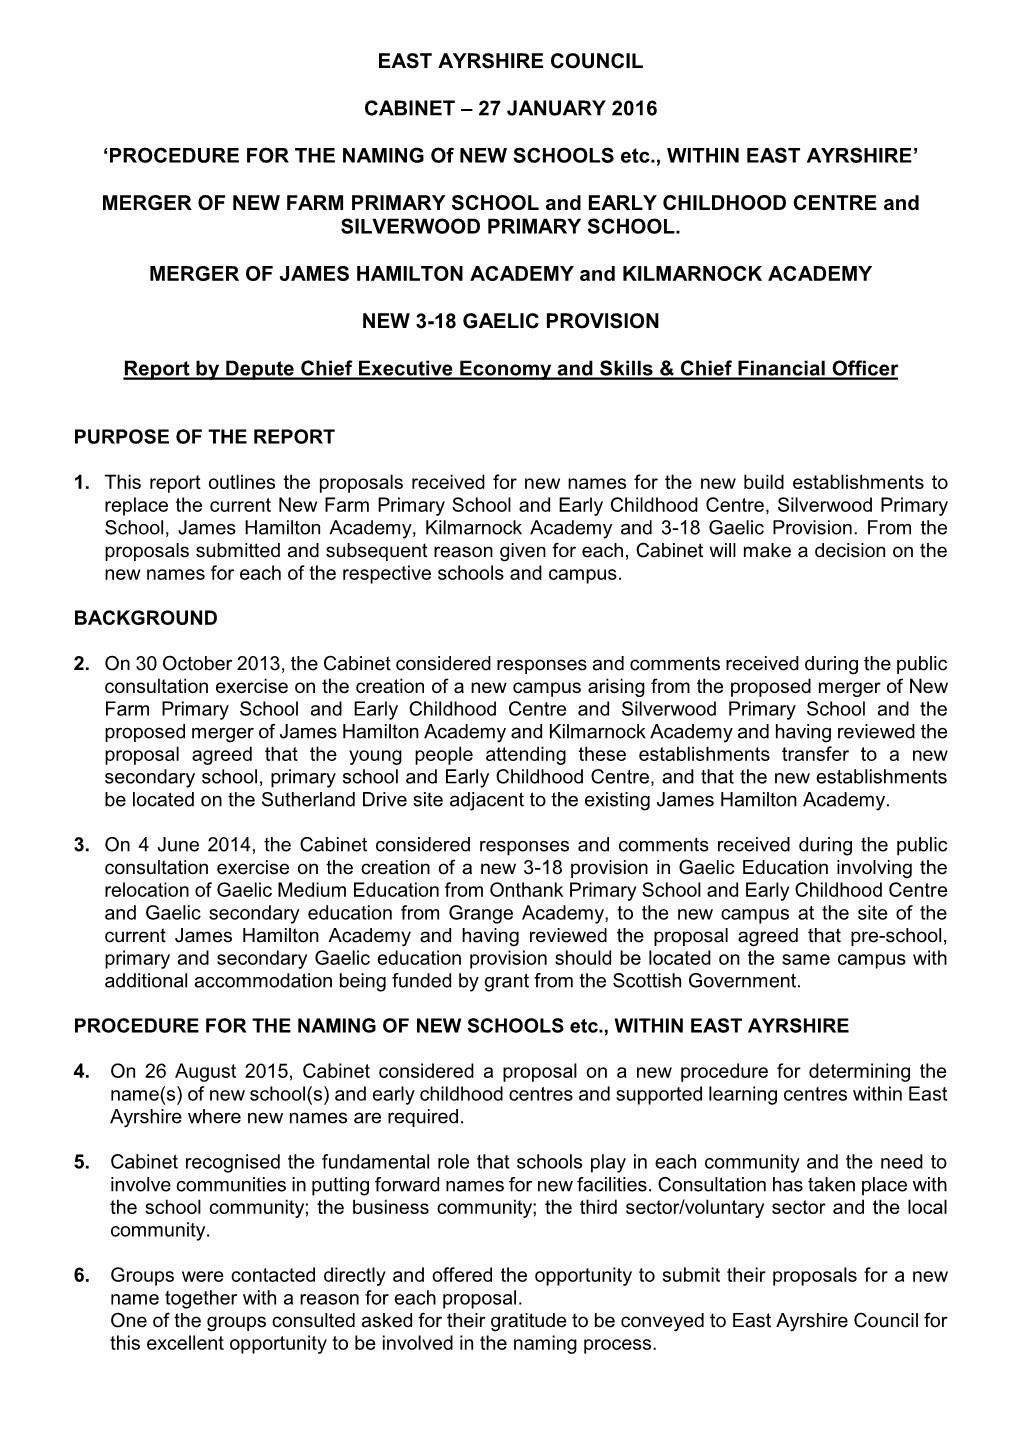 27 January 2016 Cabinet Report: Naming of the New School